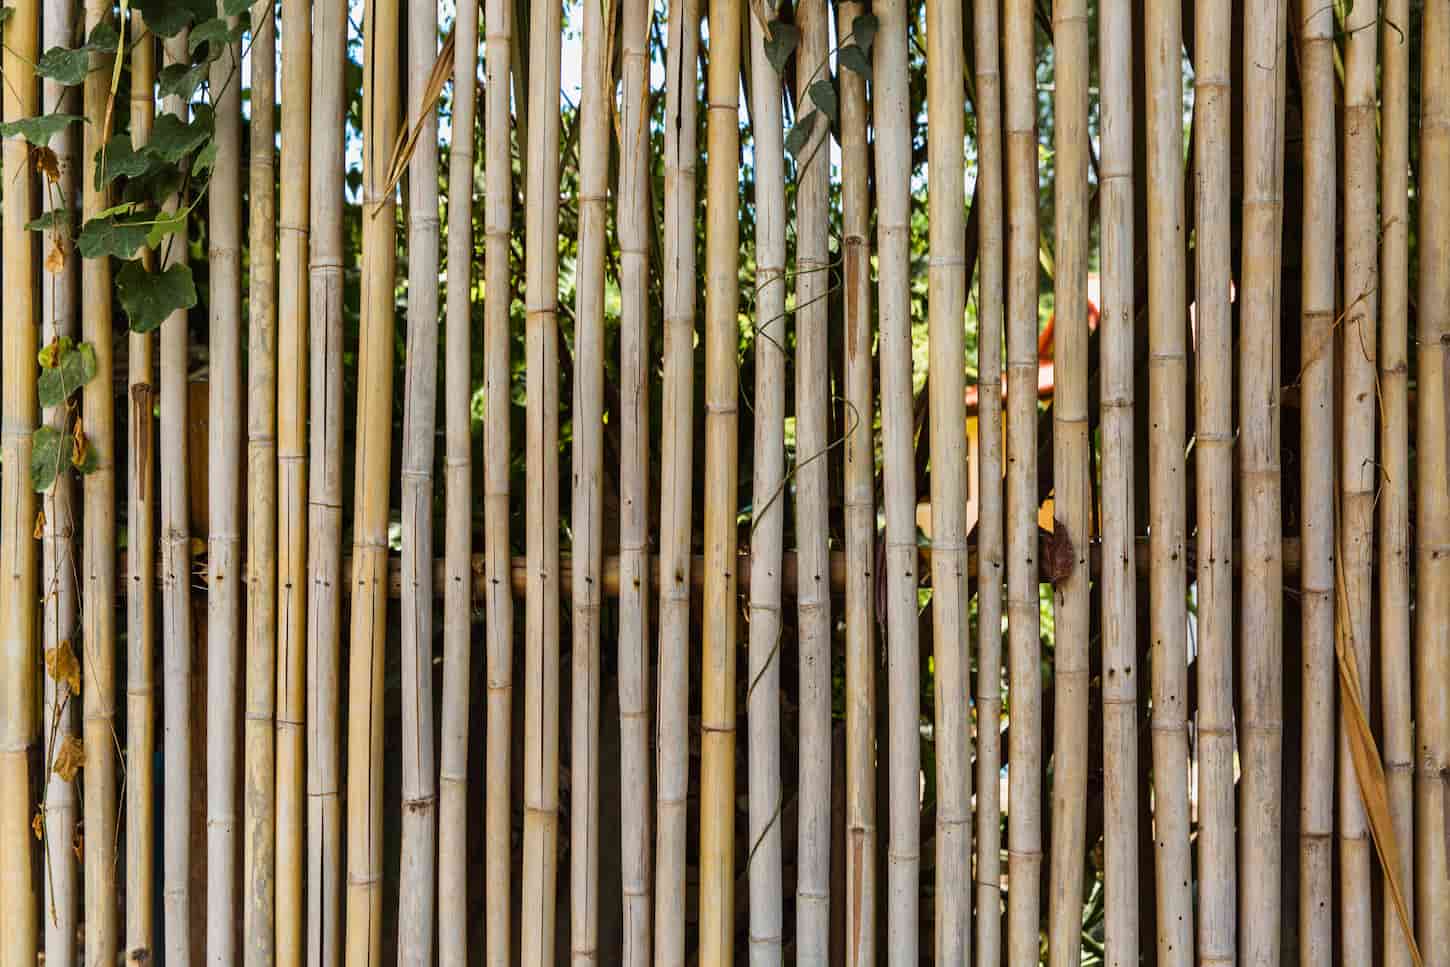 An image of a bamboo fence with greens for the background in a tropical country.